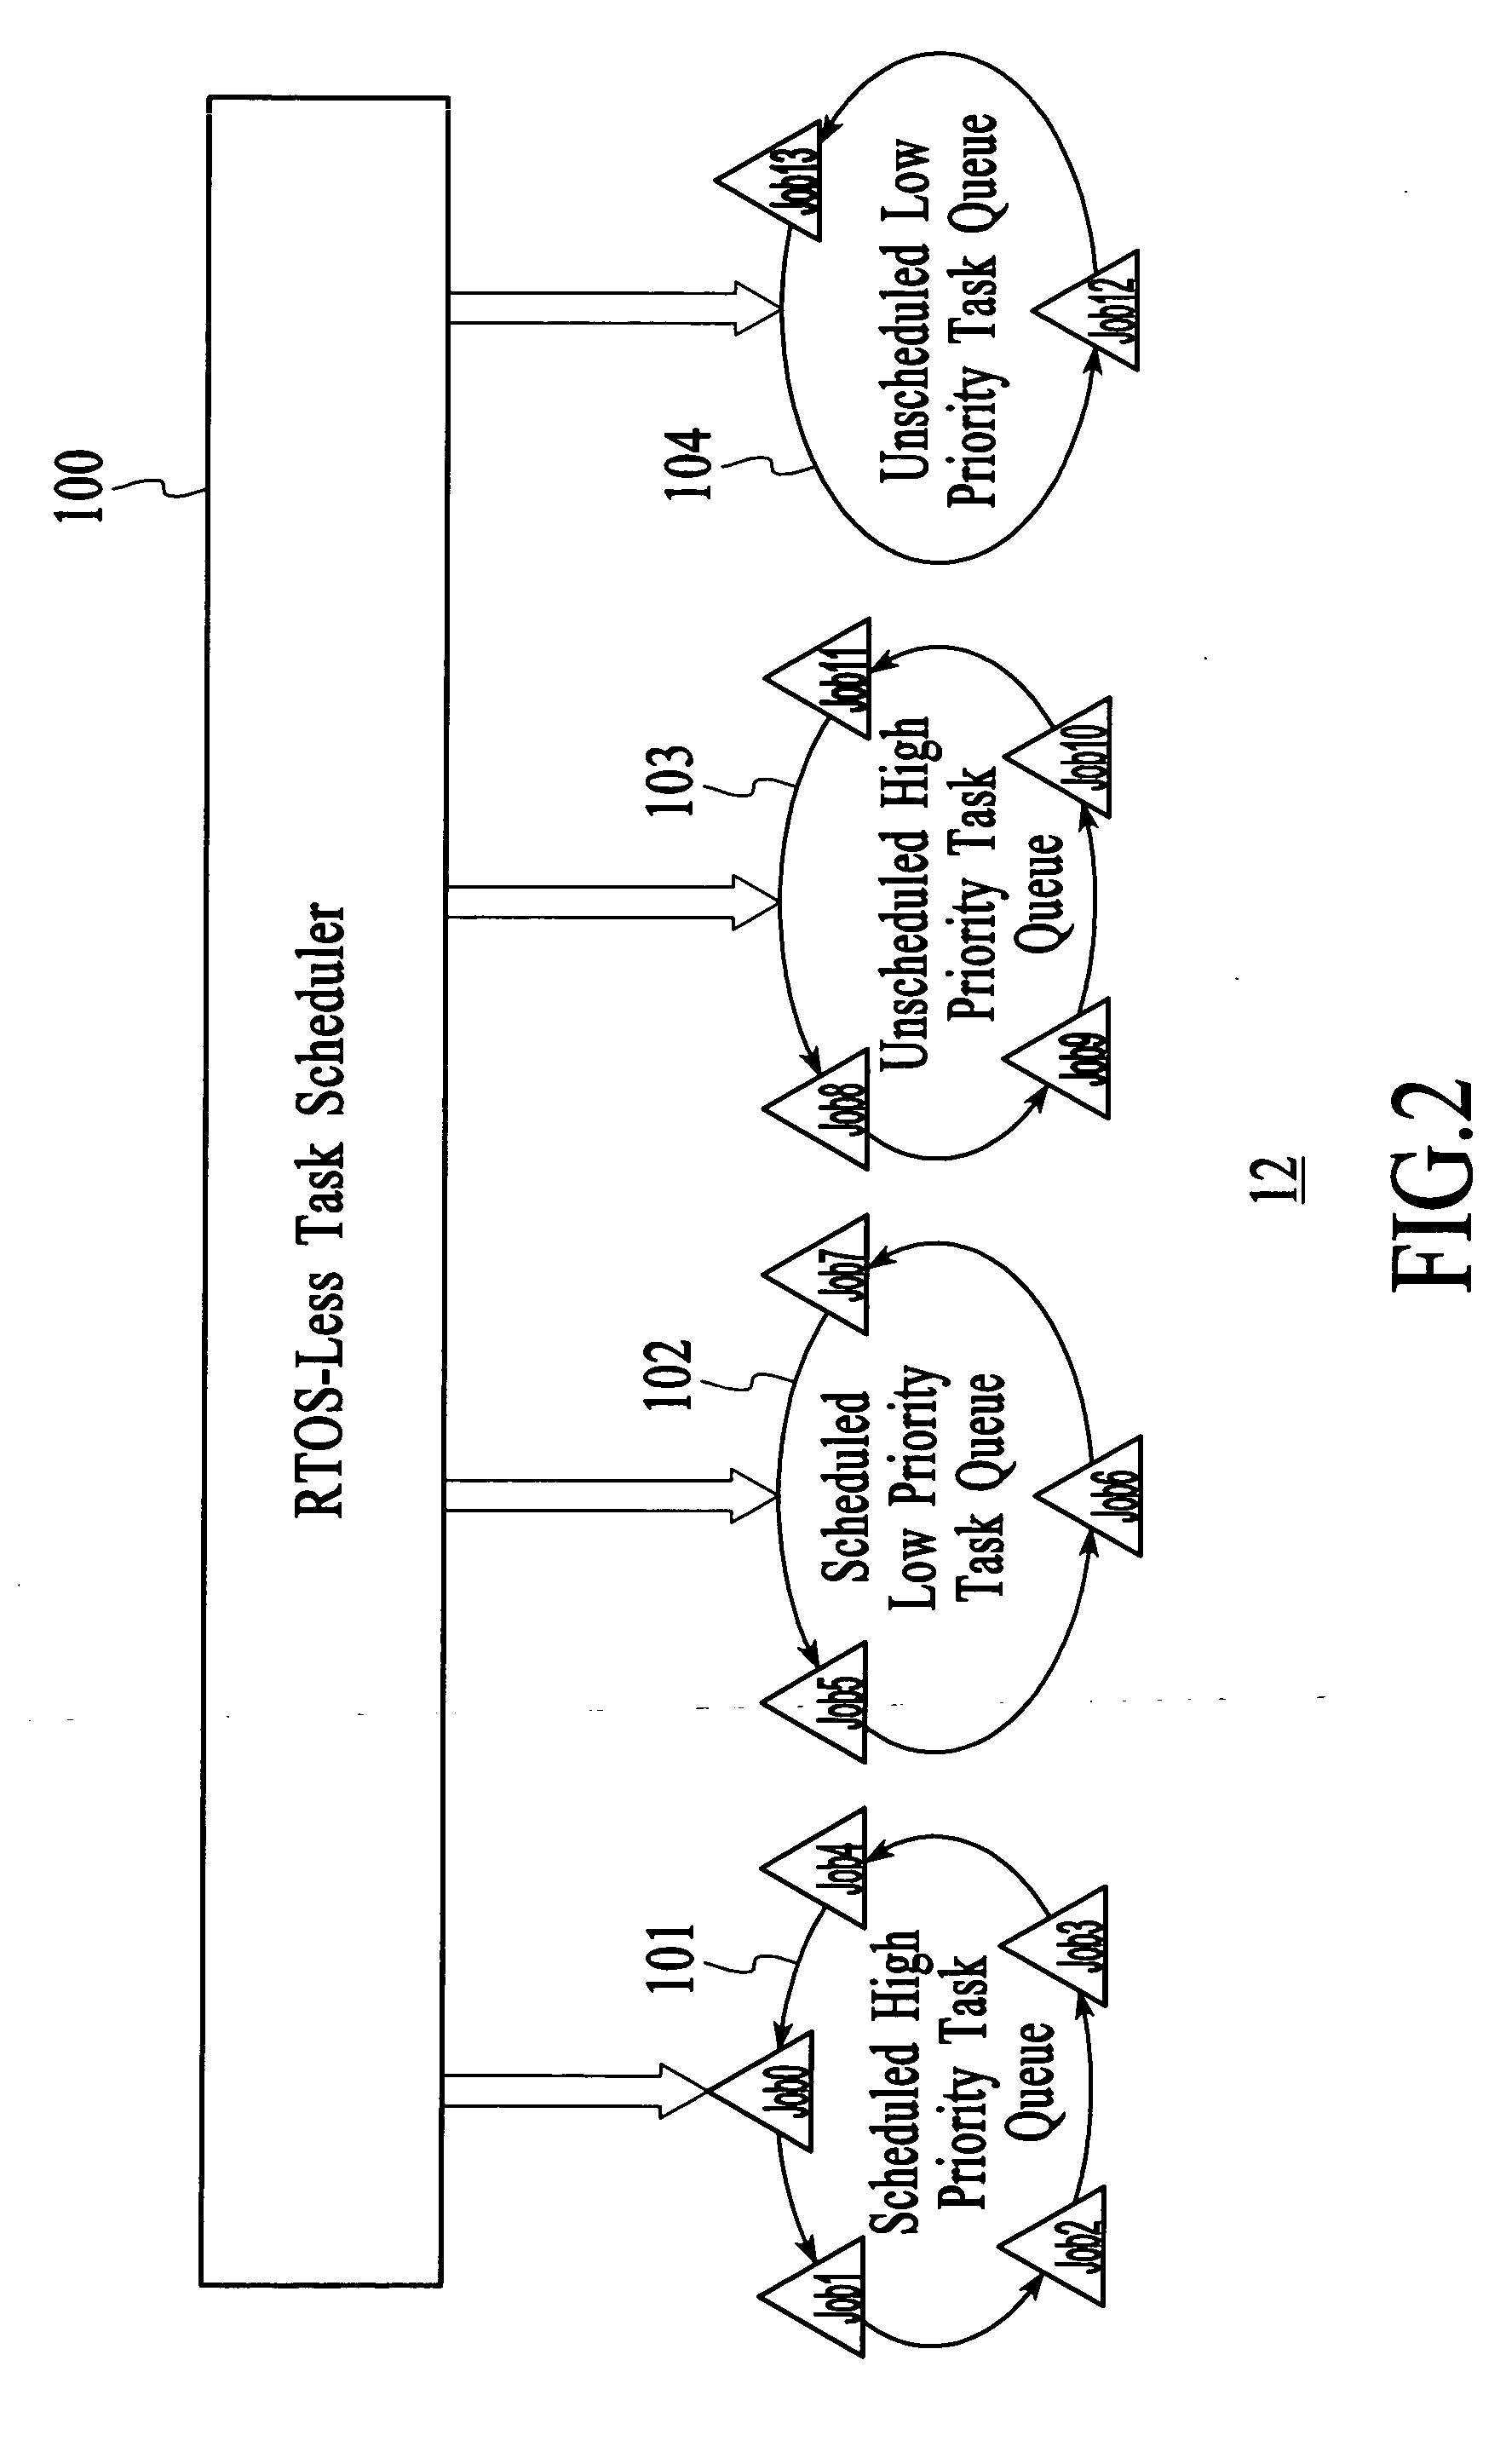 Task scheduler system and method for managing tasks in an embedded system without a real time operating system